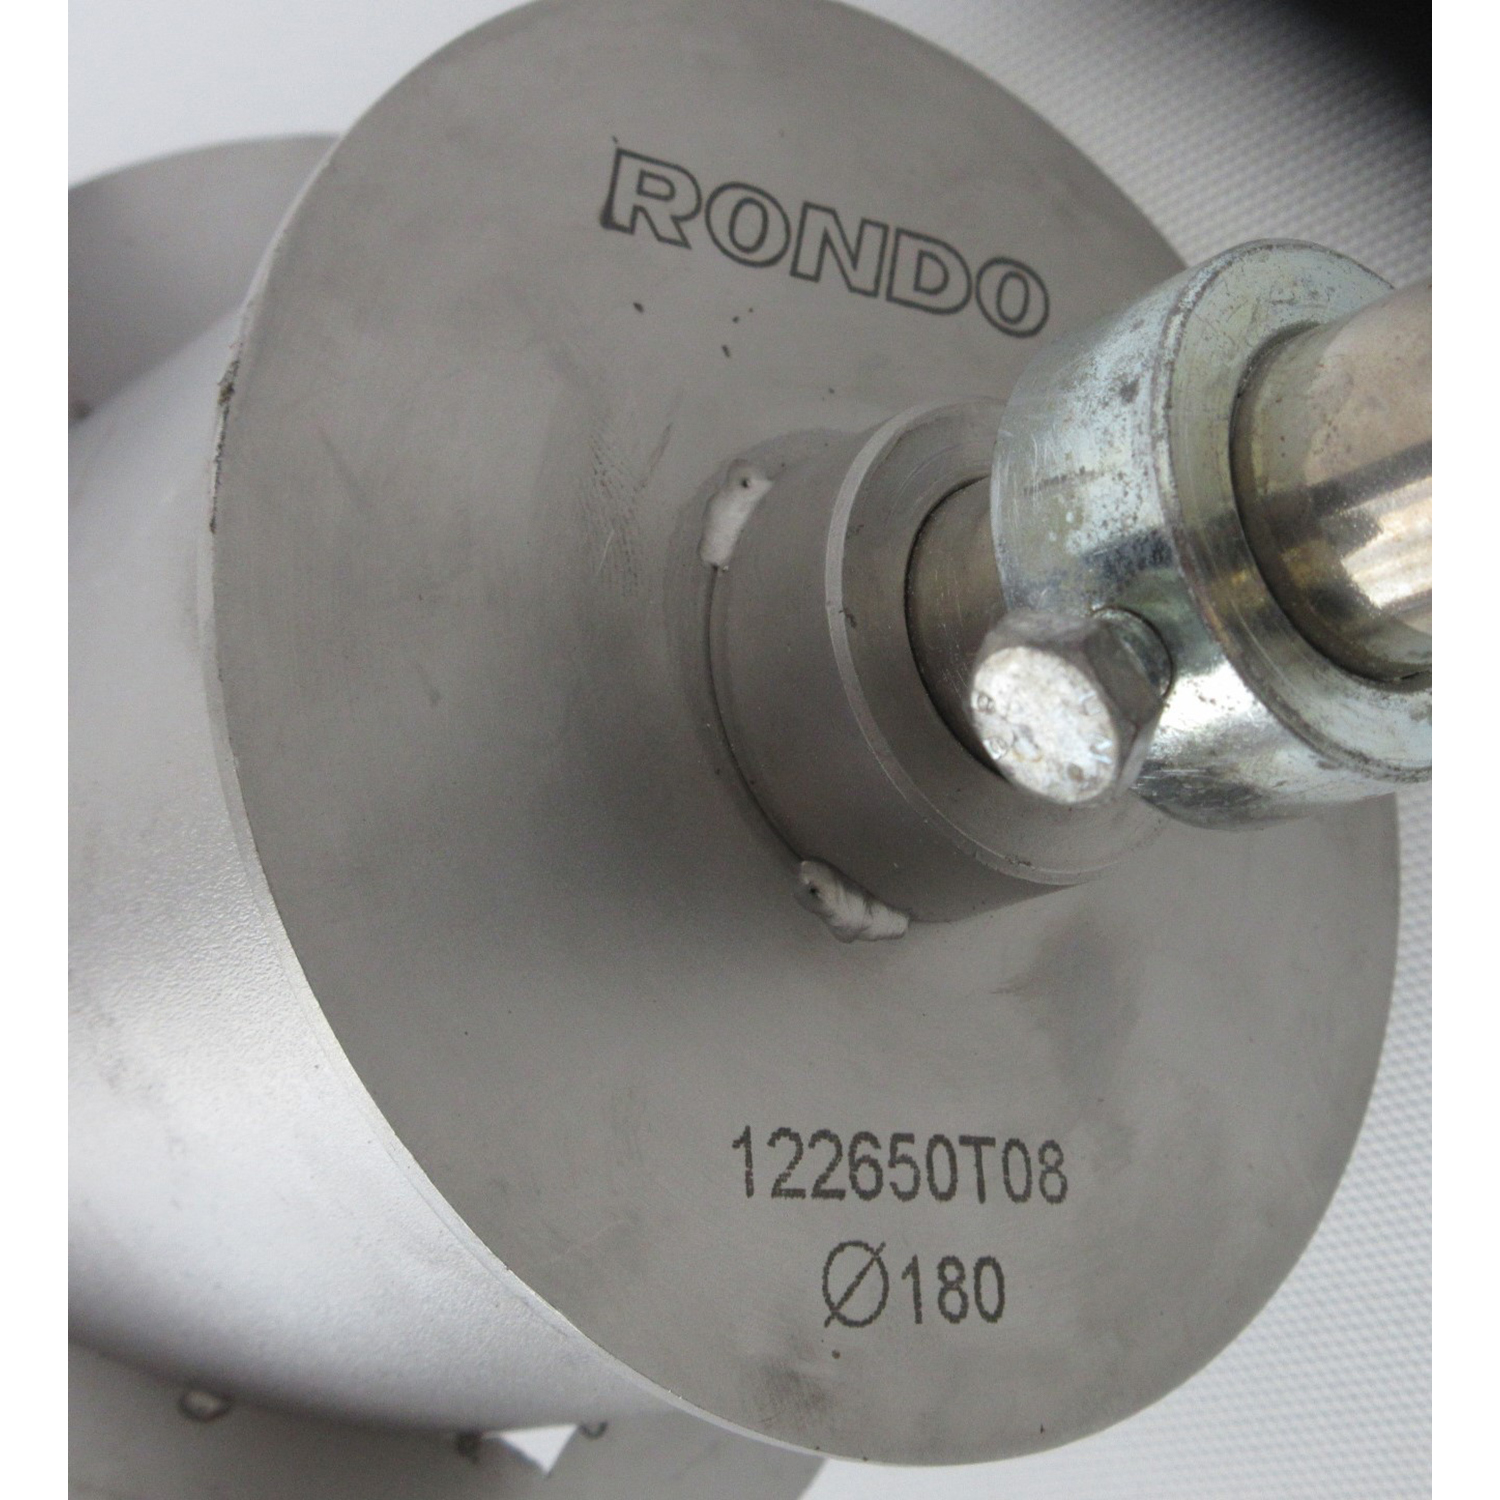 Rondo 122650T08 Rotary Cutter 180mm Dia, Used Excellent Condition image 2